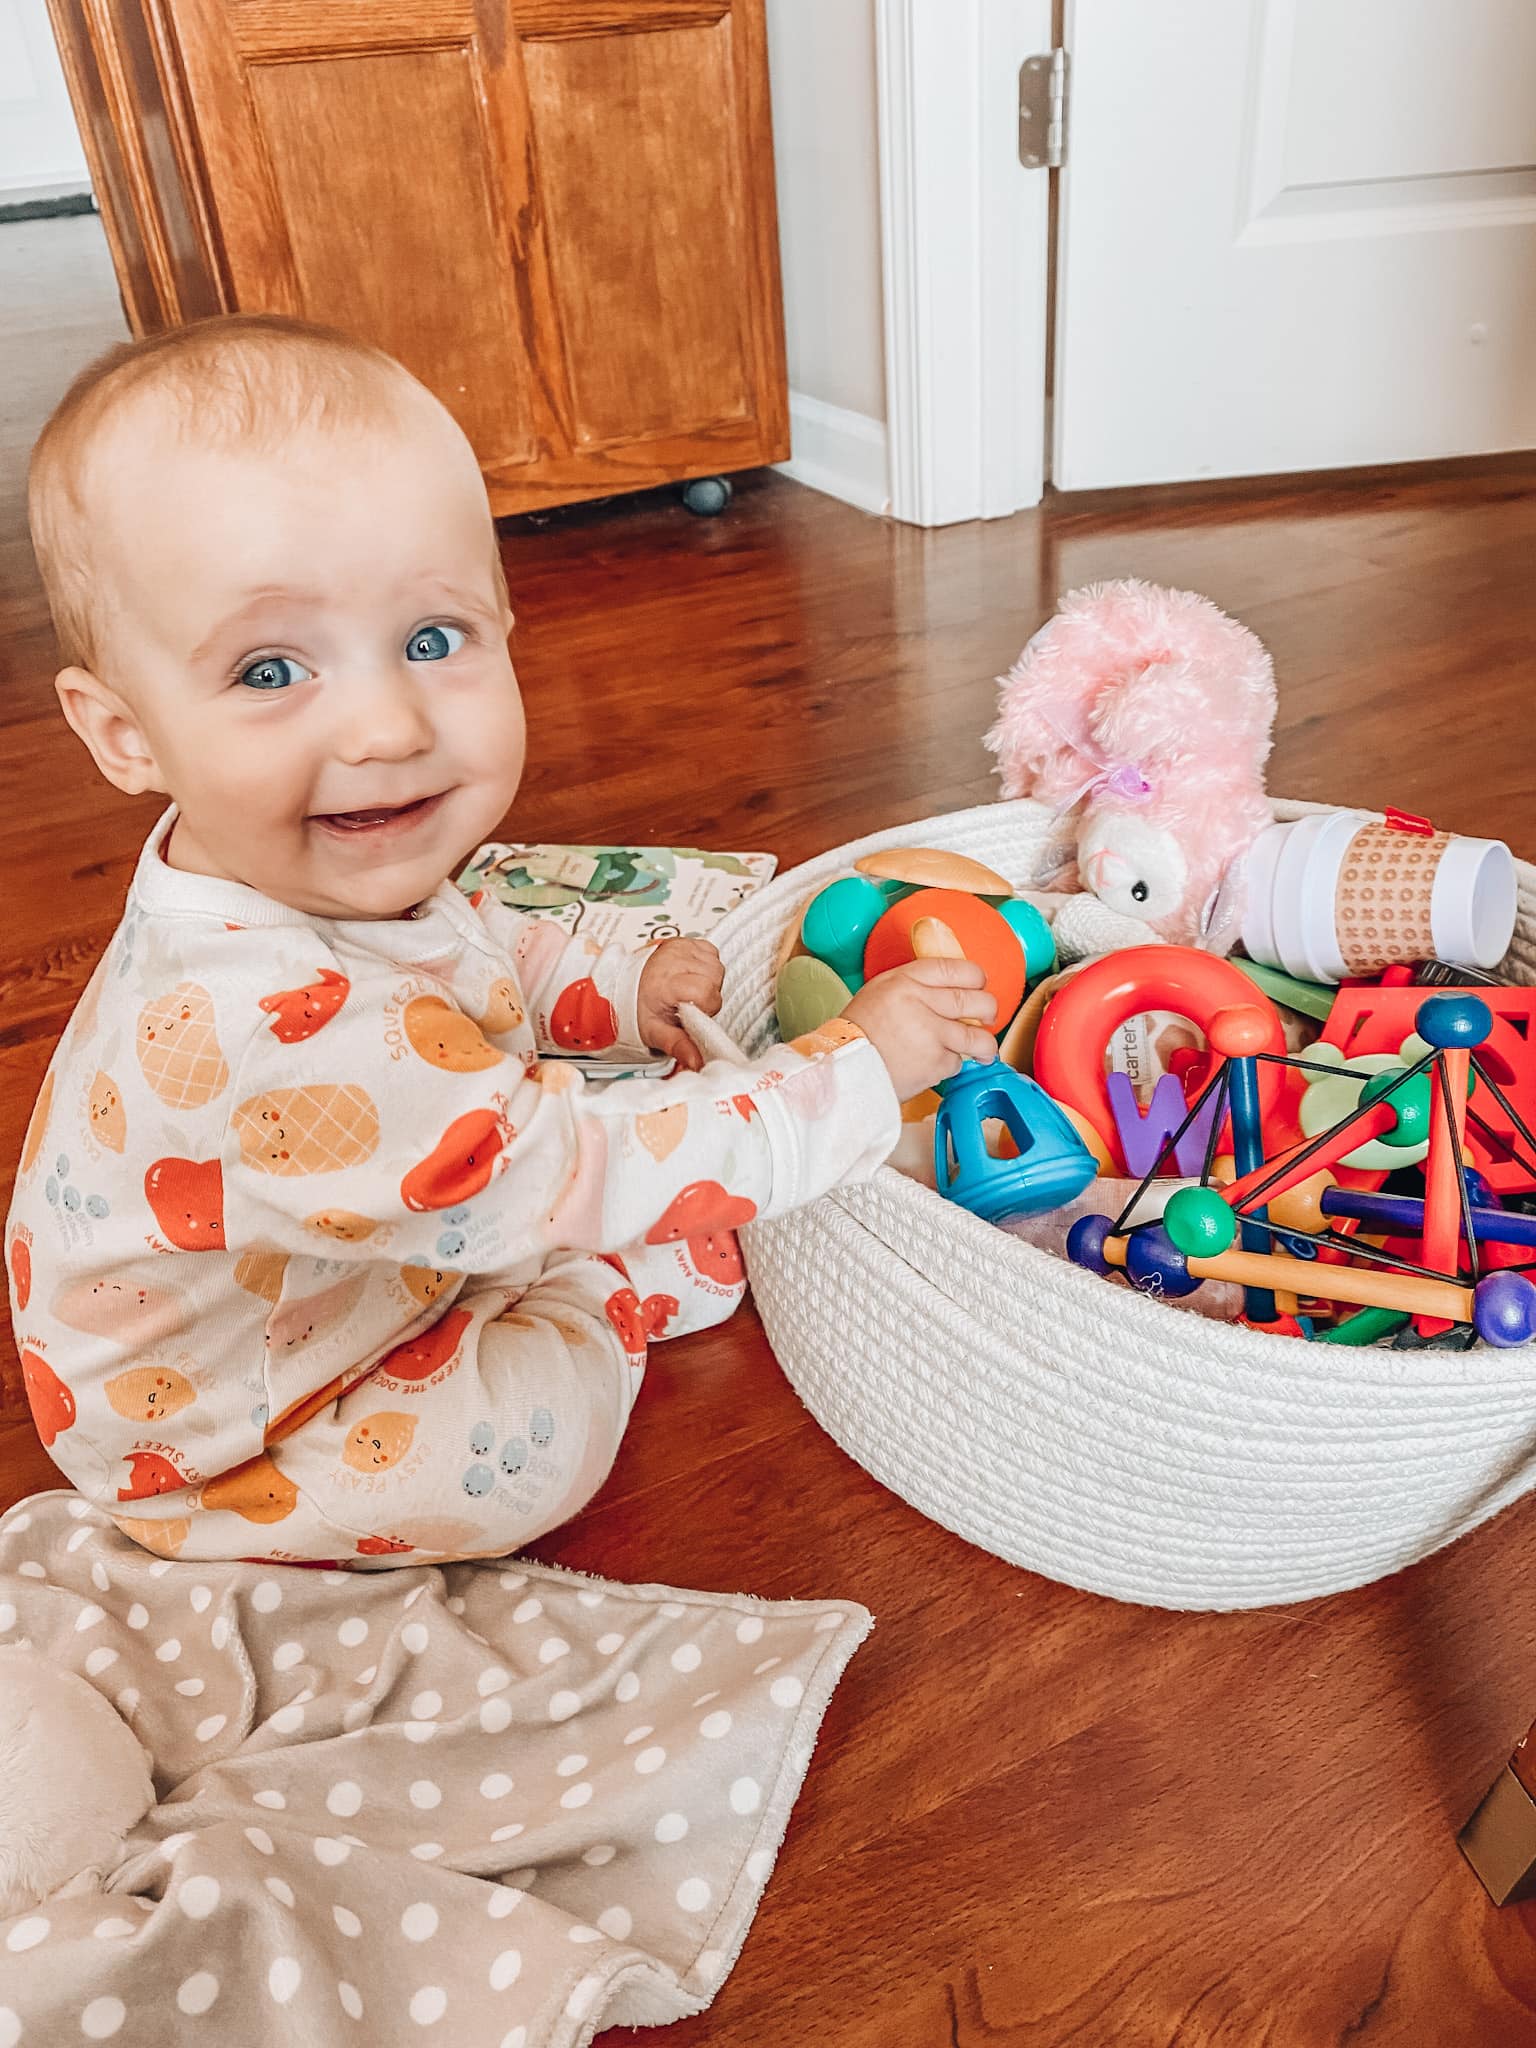 Baby girl sitting up holding a toy basket.